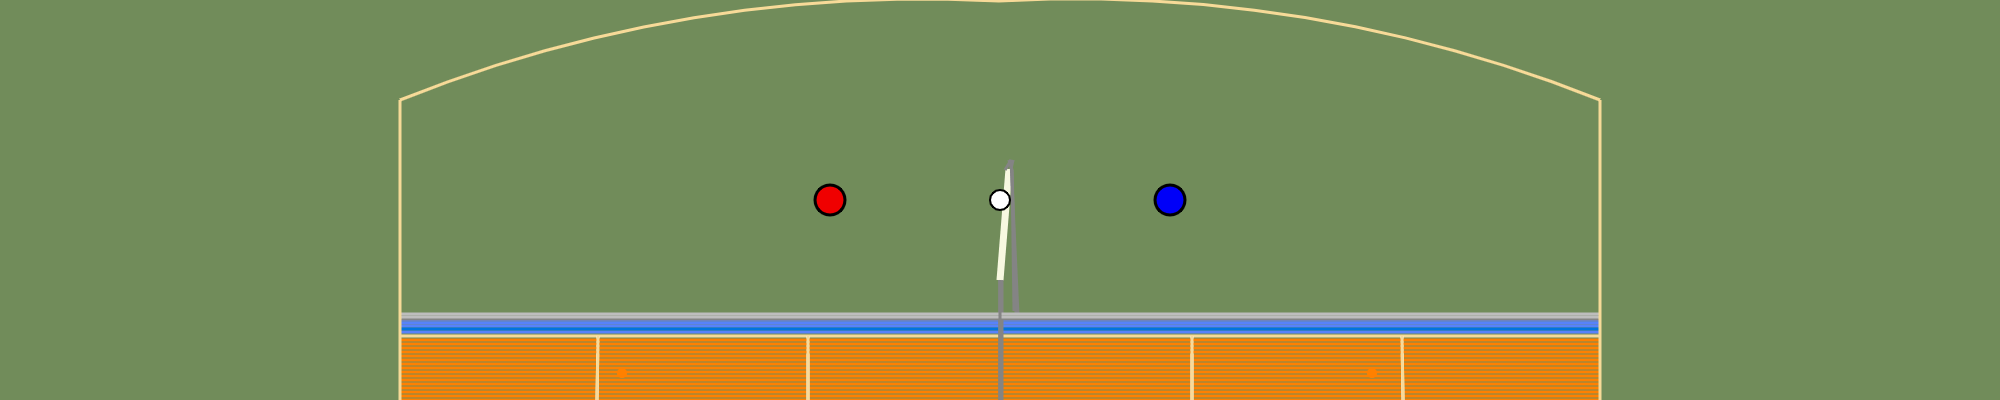 hax ball maps | Volleyball